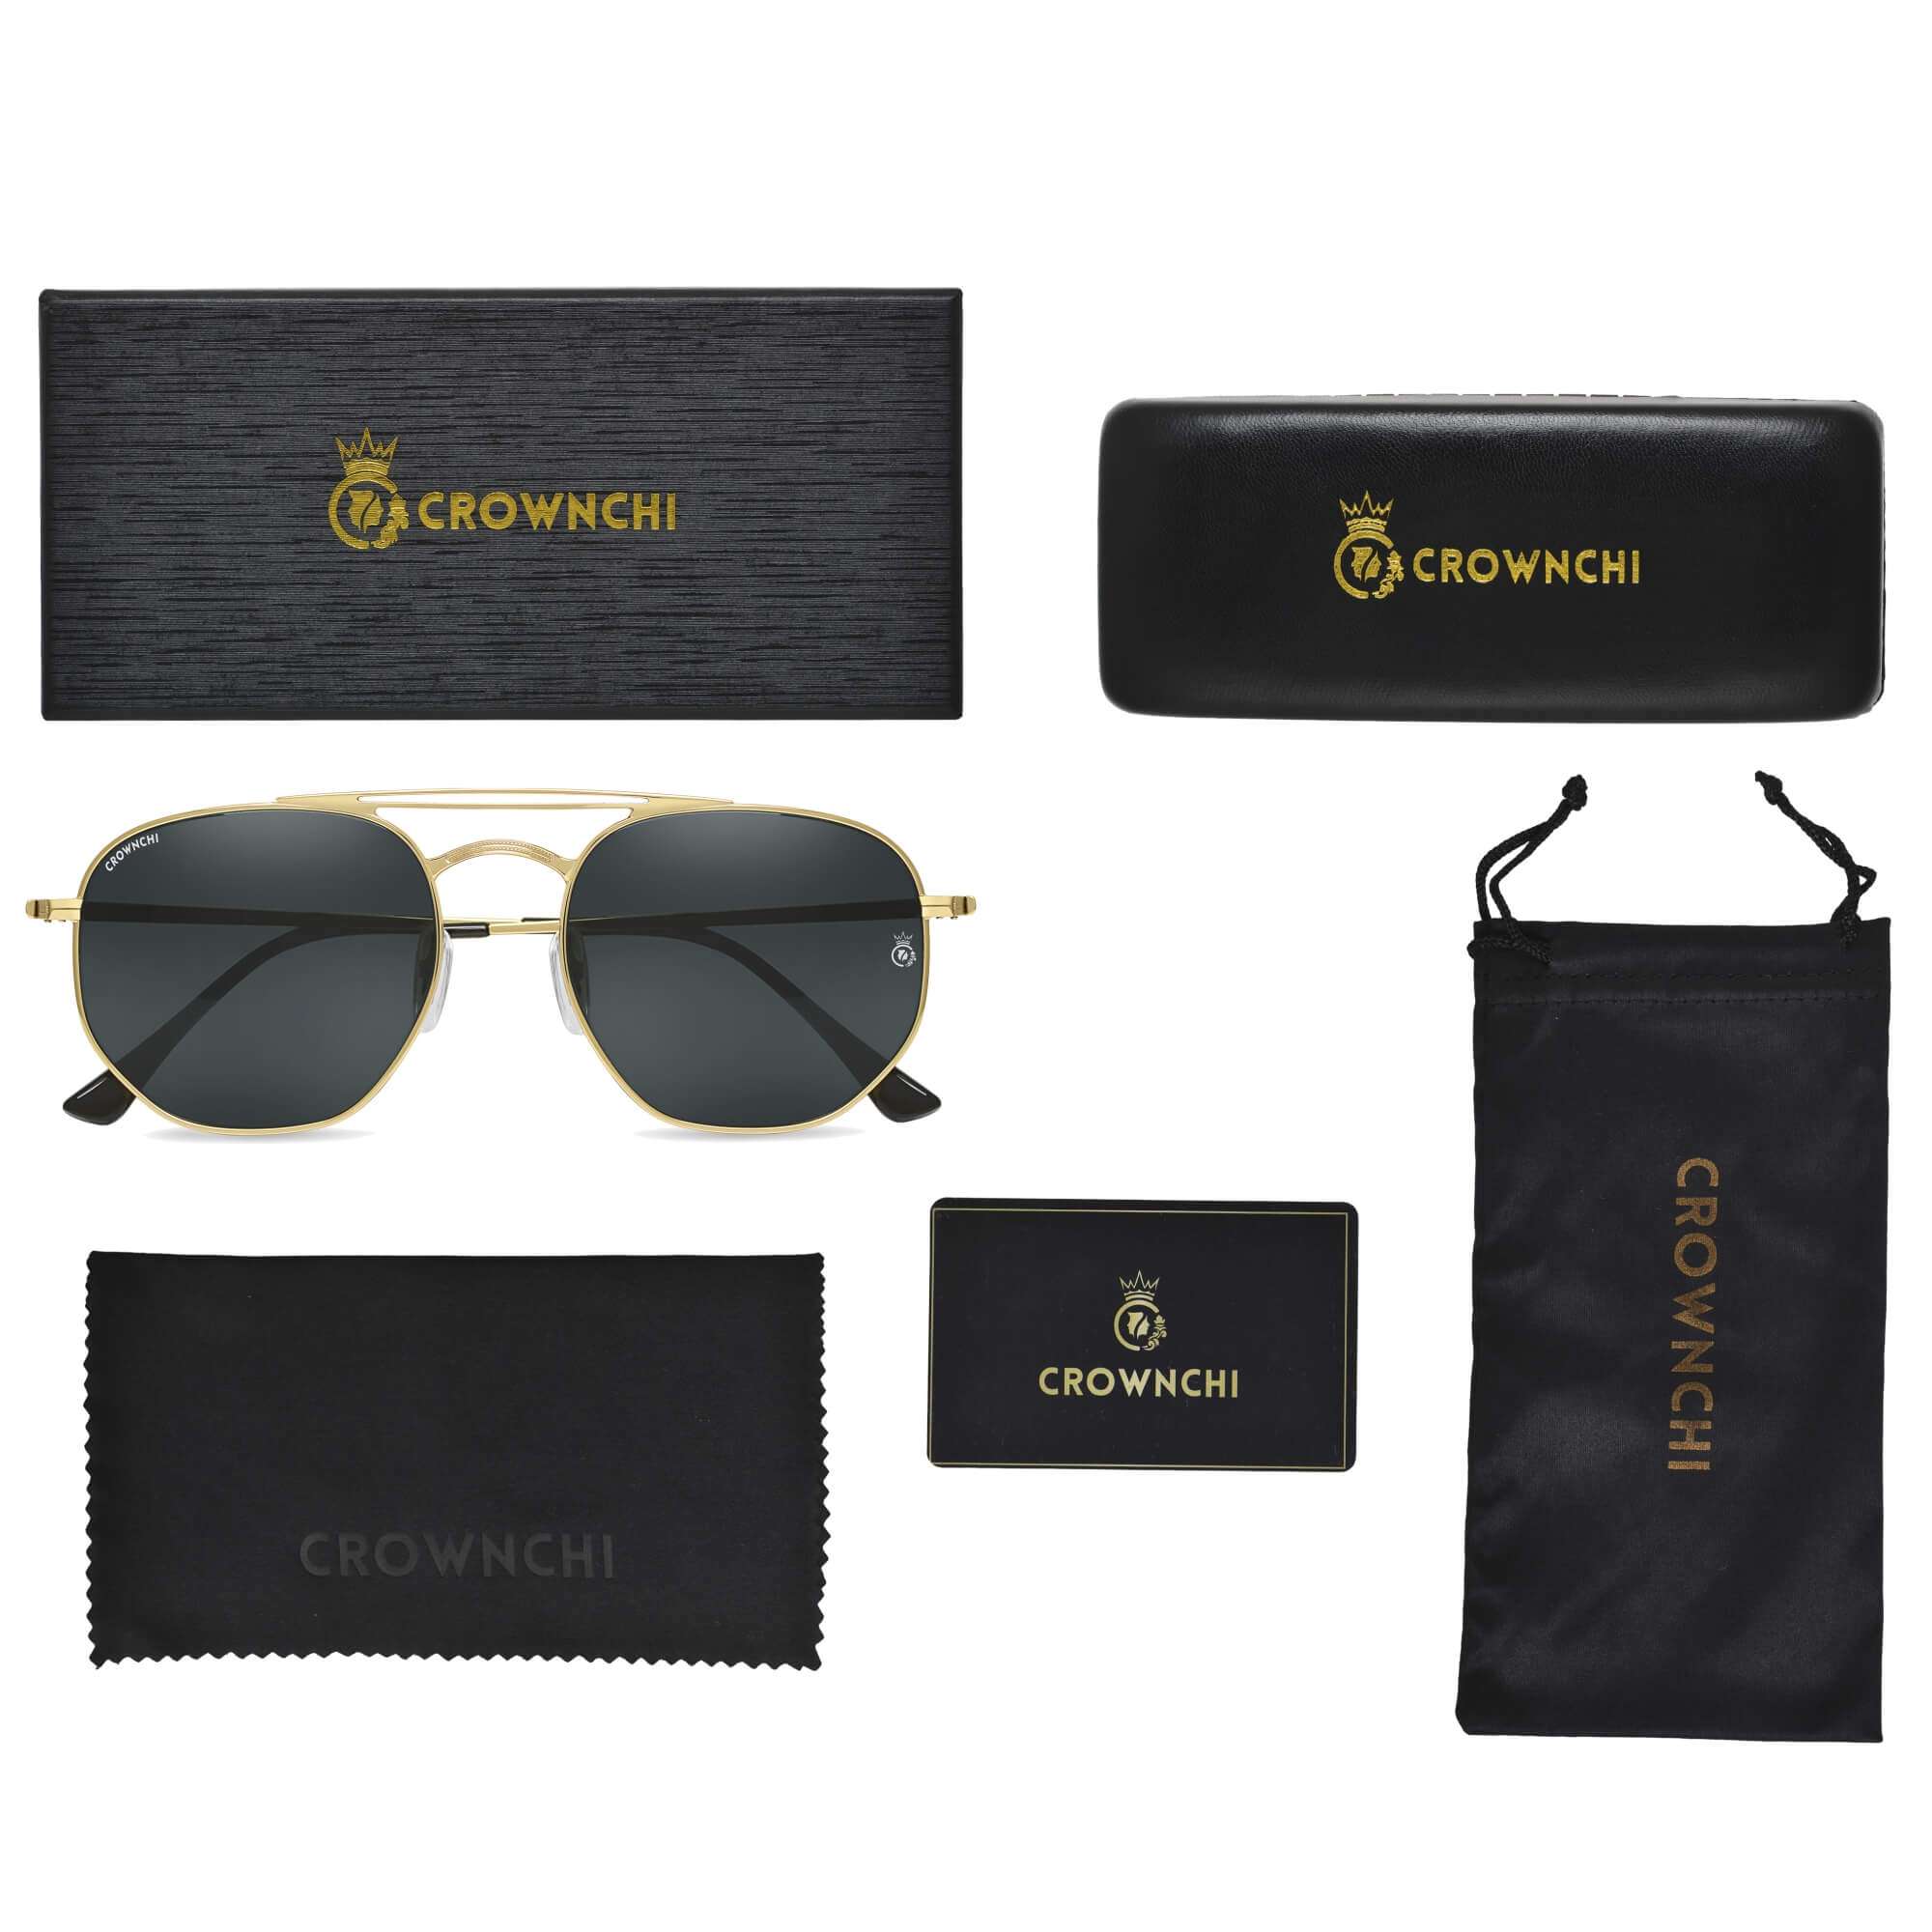 Moscow Gold Black Round Edition Sunglasses